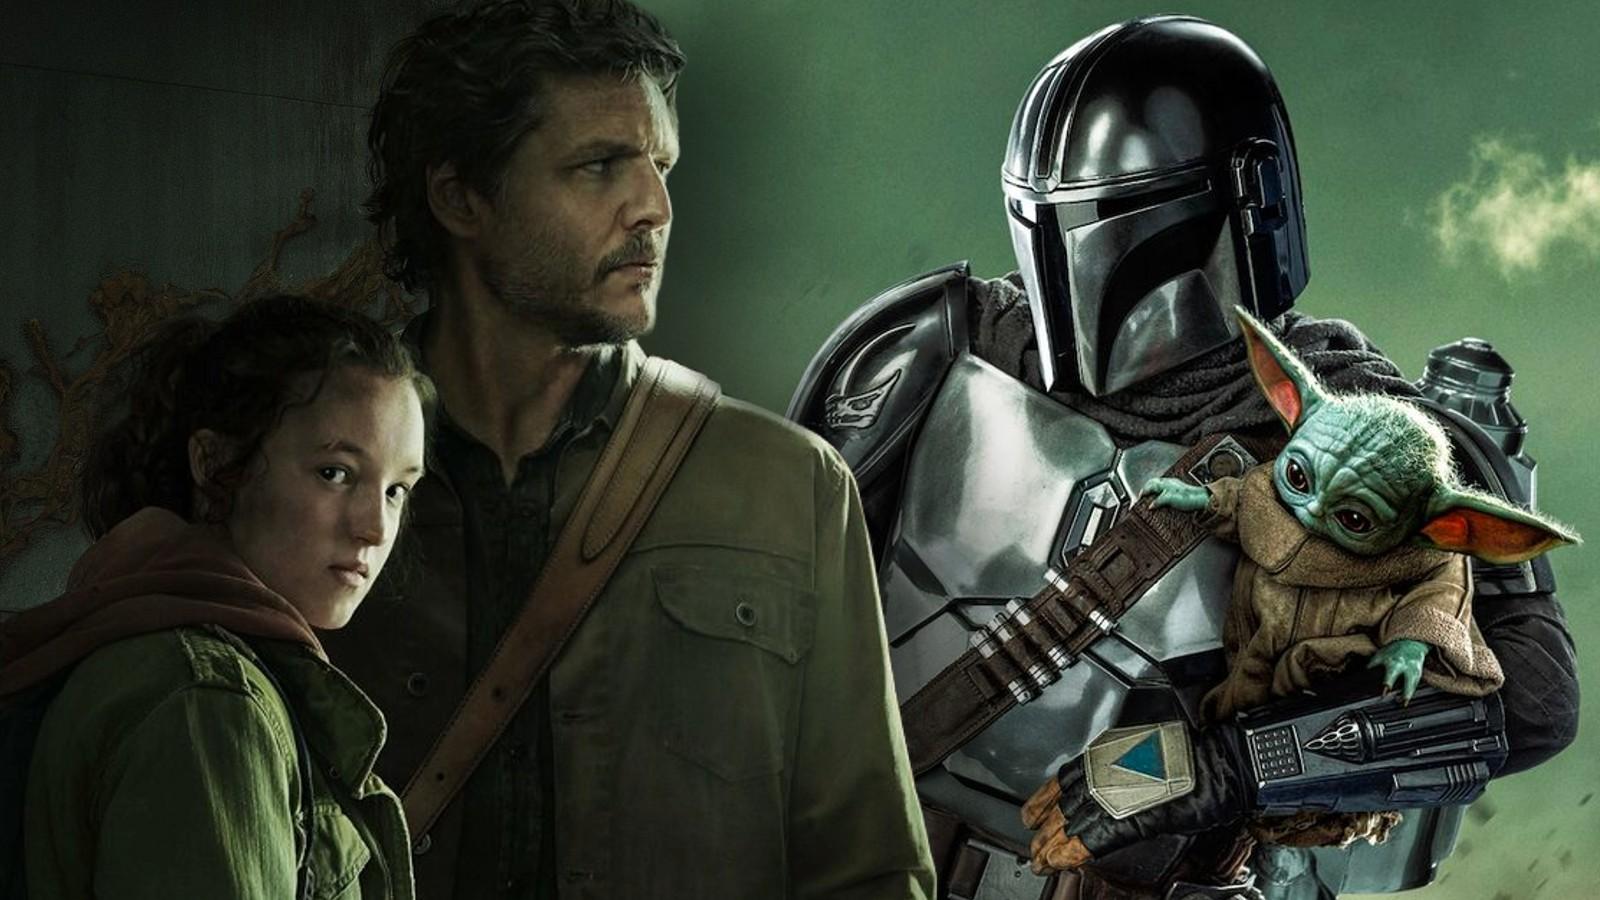 Pedro Pacal and Bella Ramsey in The Last of Us and a still from The Mandalorian